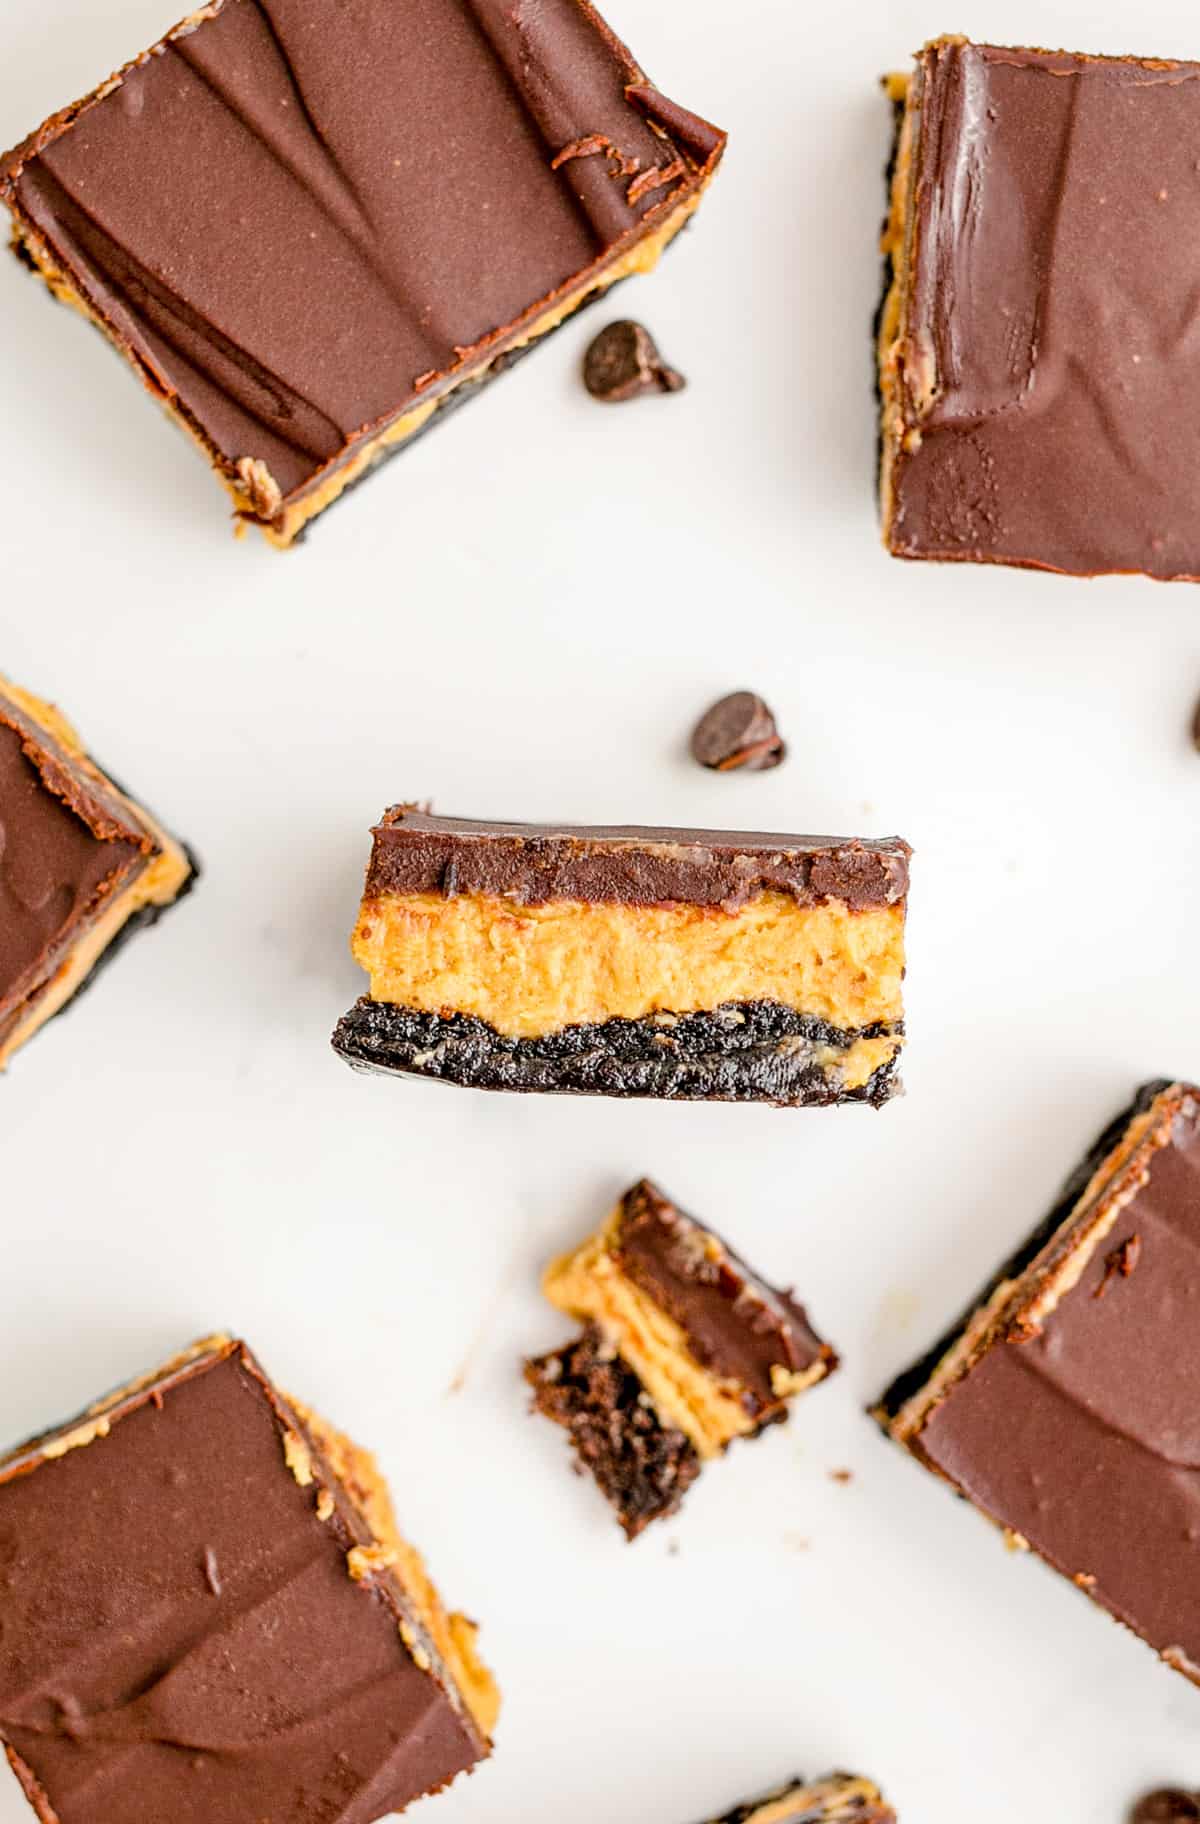 Overhead photo of one brownie on its side showing the brownie, peanut butter and ganache layers.